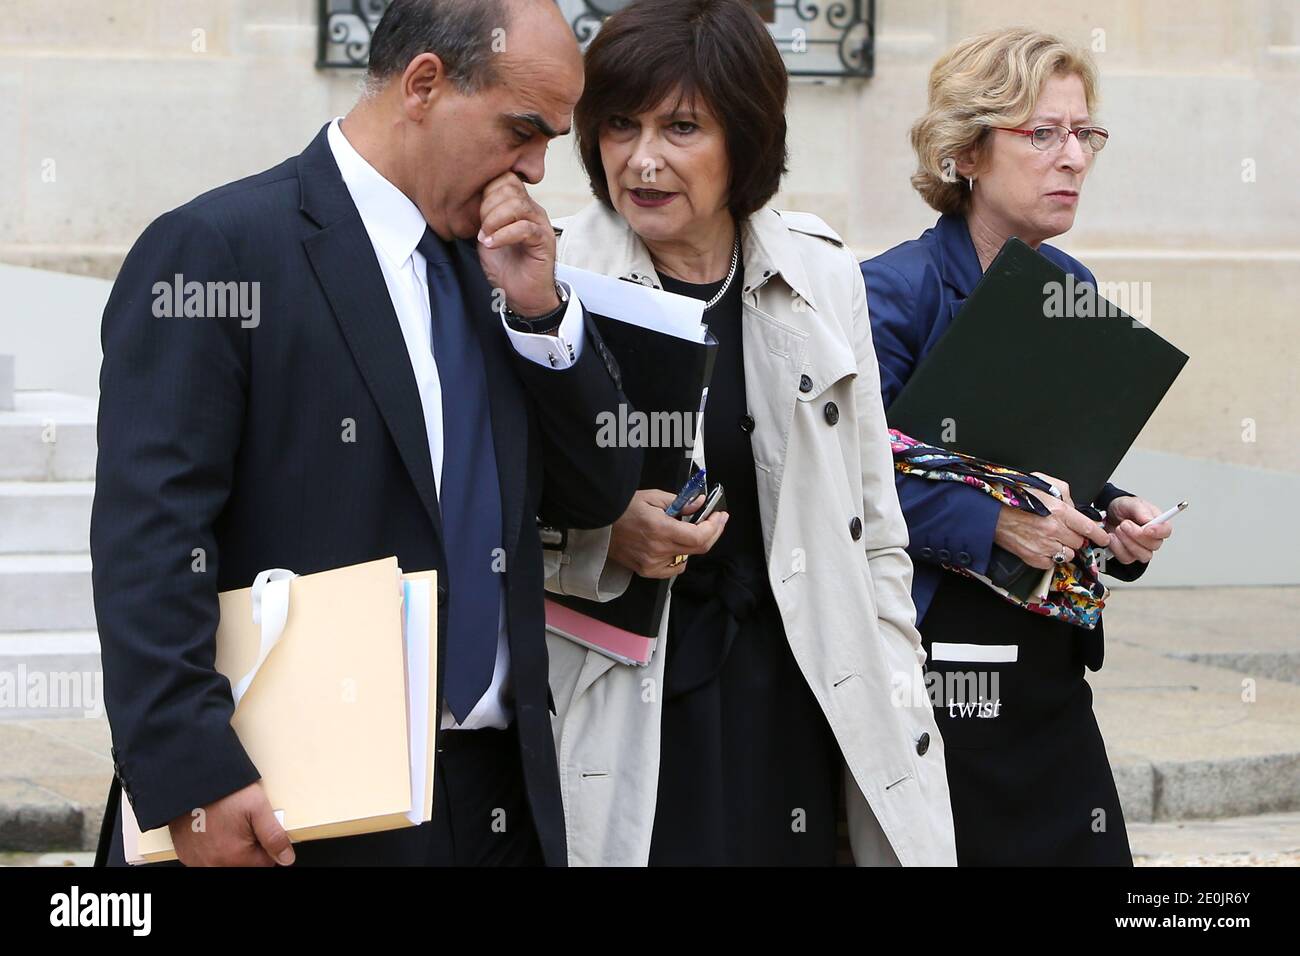 French Junior Minister for Veterans, Kader Arif, Junior Minister for Disabled People Marie-Arlette Carlotti and French Higher Education and Research Minister Genevieve Fioraso leave the Elysee Palace in Paris, France on July 11, 2012 after the weekly cabinet meeting. Photo by Stephane Lemouton/ABACAPRESS.COM. Stock Photo